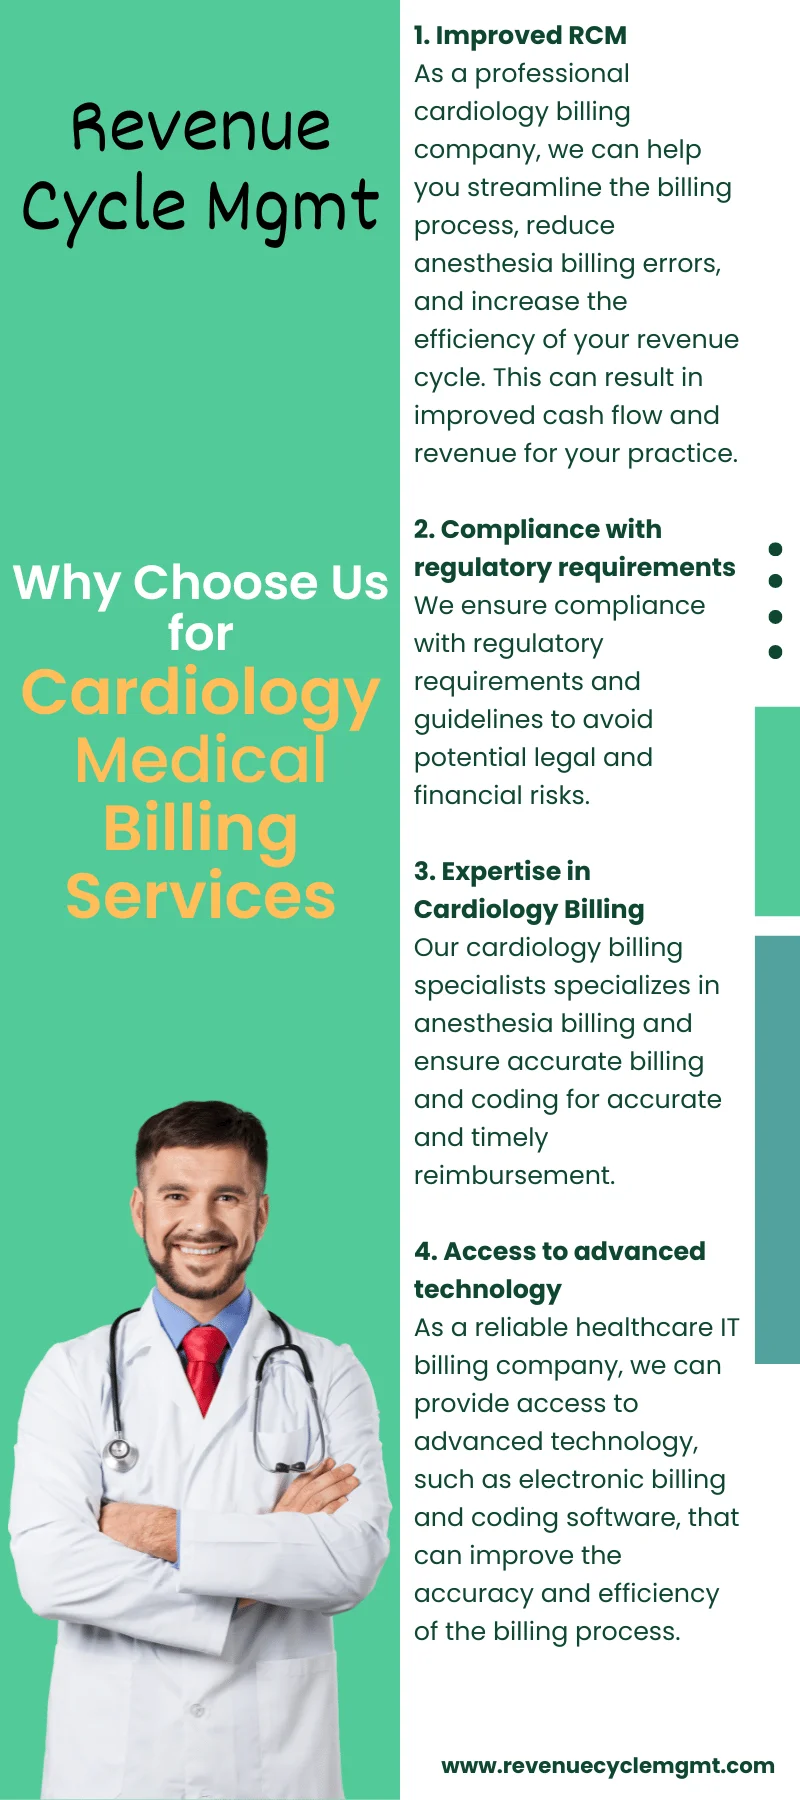 Why Choose Us for Cardiology Medical Billing Services